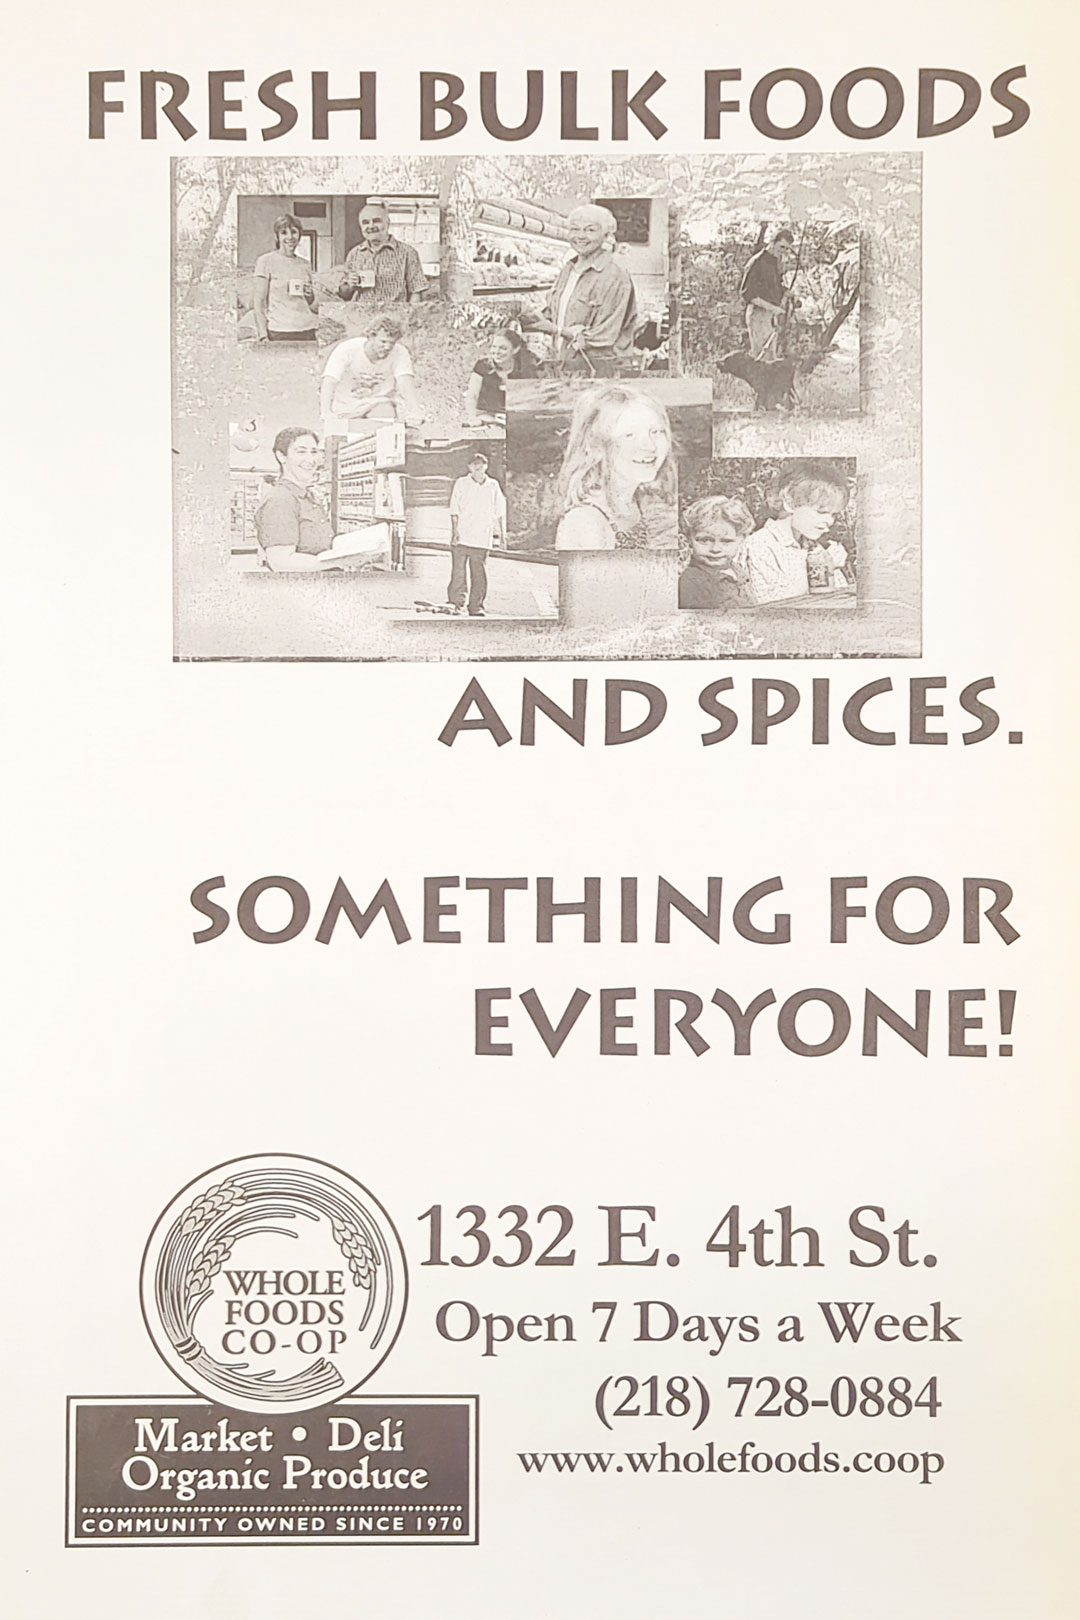 A flyer advertises "Fresh Bulk Foods and Spices. Something for Everyone!" with black-and-white photos of people smiling and interacting. It includes the Whole Foods Coop Duluth MN logo, address (1332 E. 4th St.), contact number (218-728-0884), and website (wholefoods.coop).